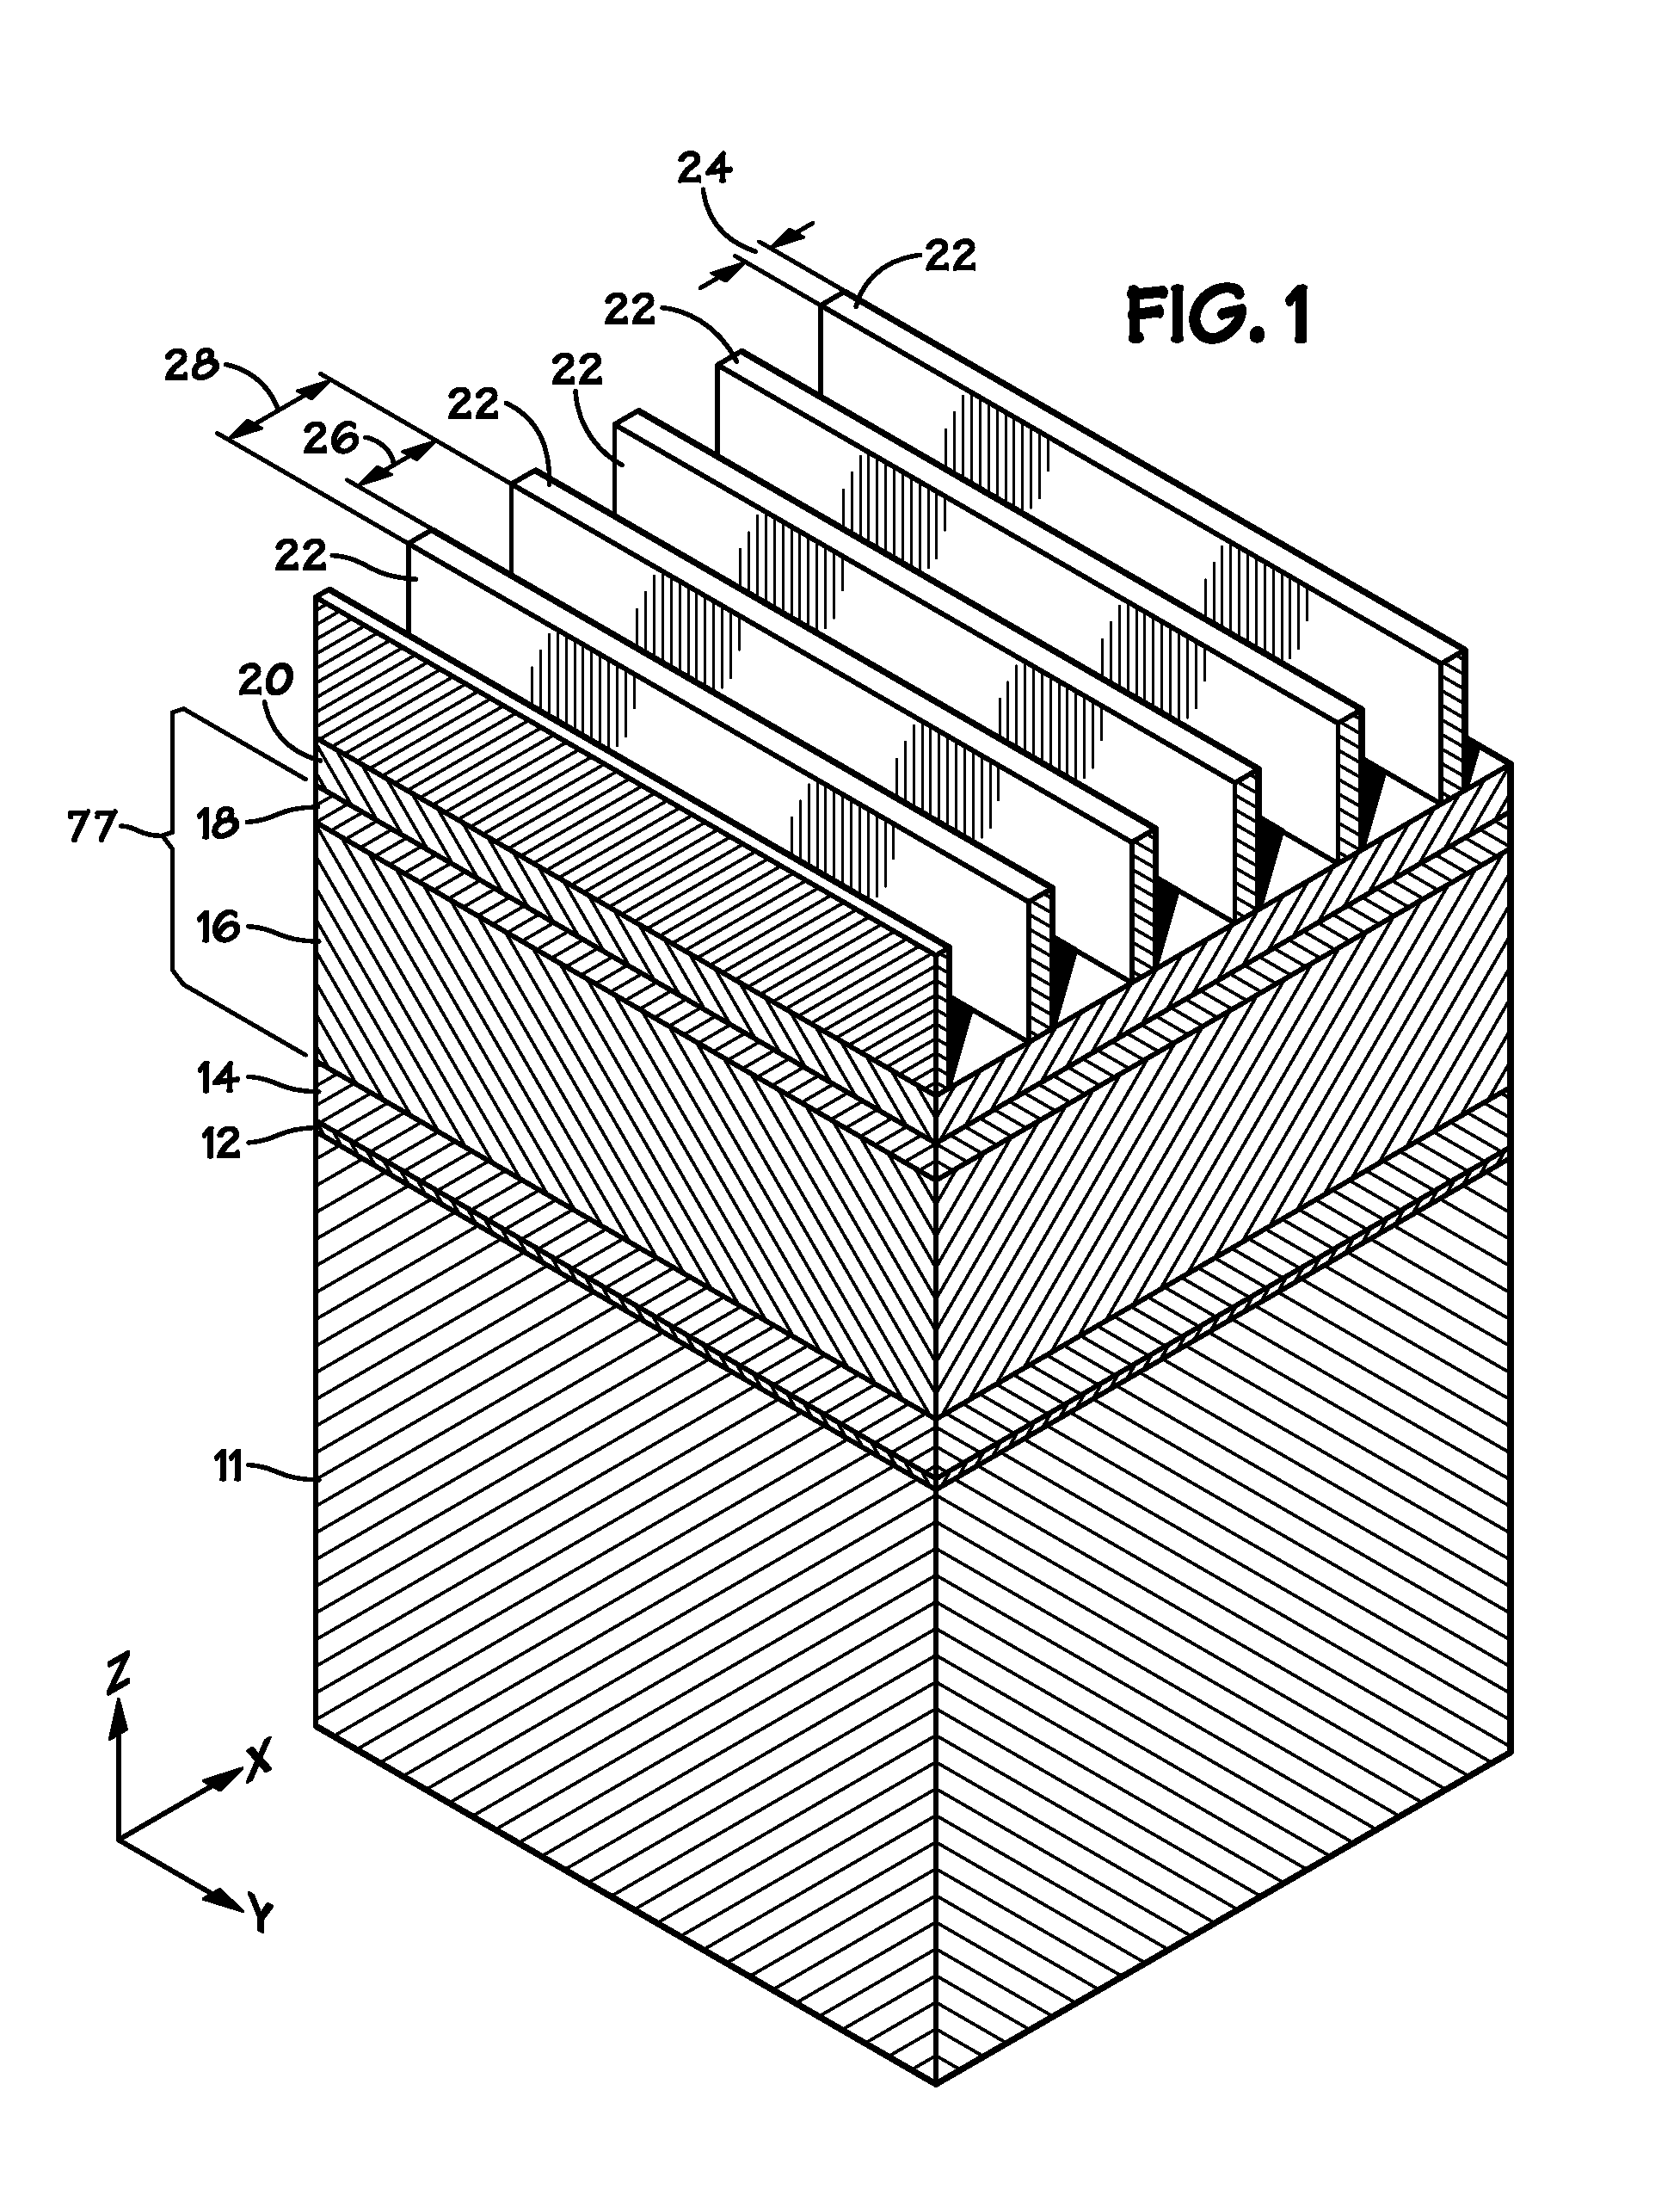 Method of Forming a DRAM Array of Devices with Vertically Integrated Recessed Access Device and Digitline